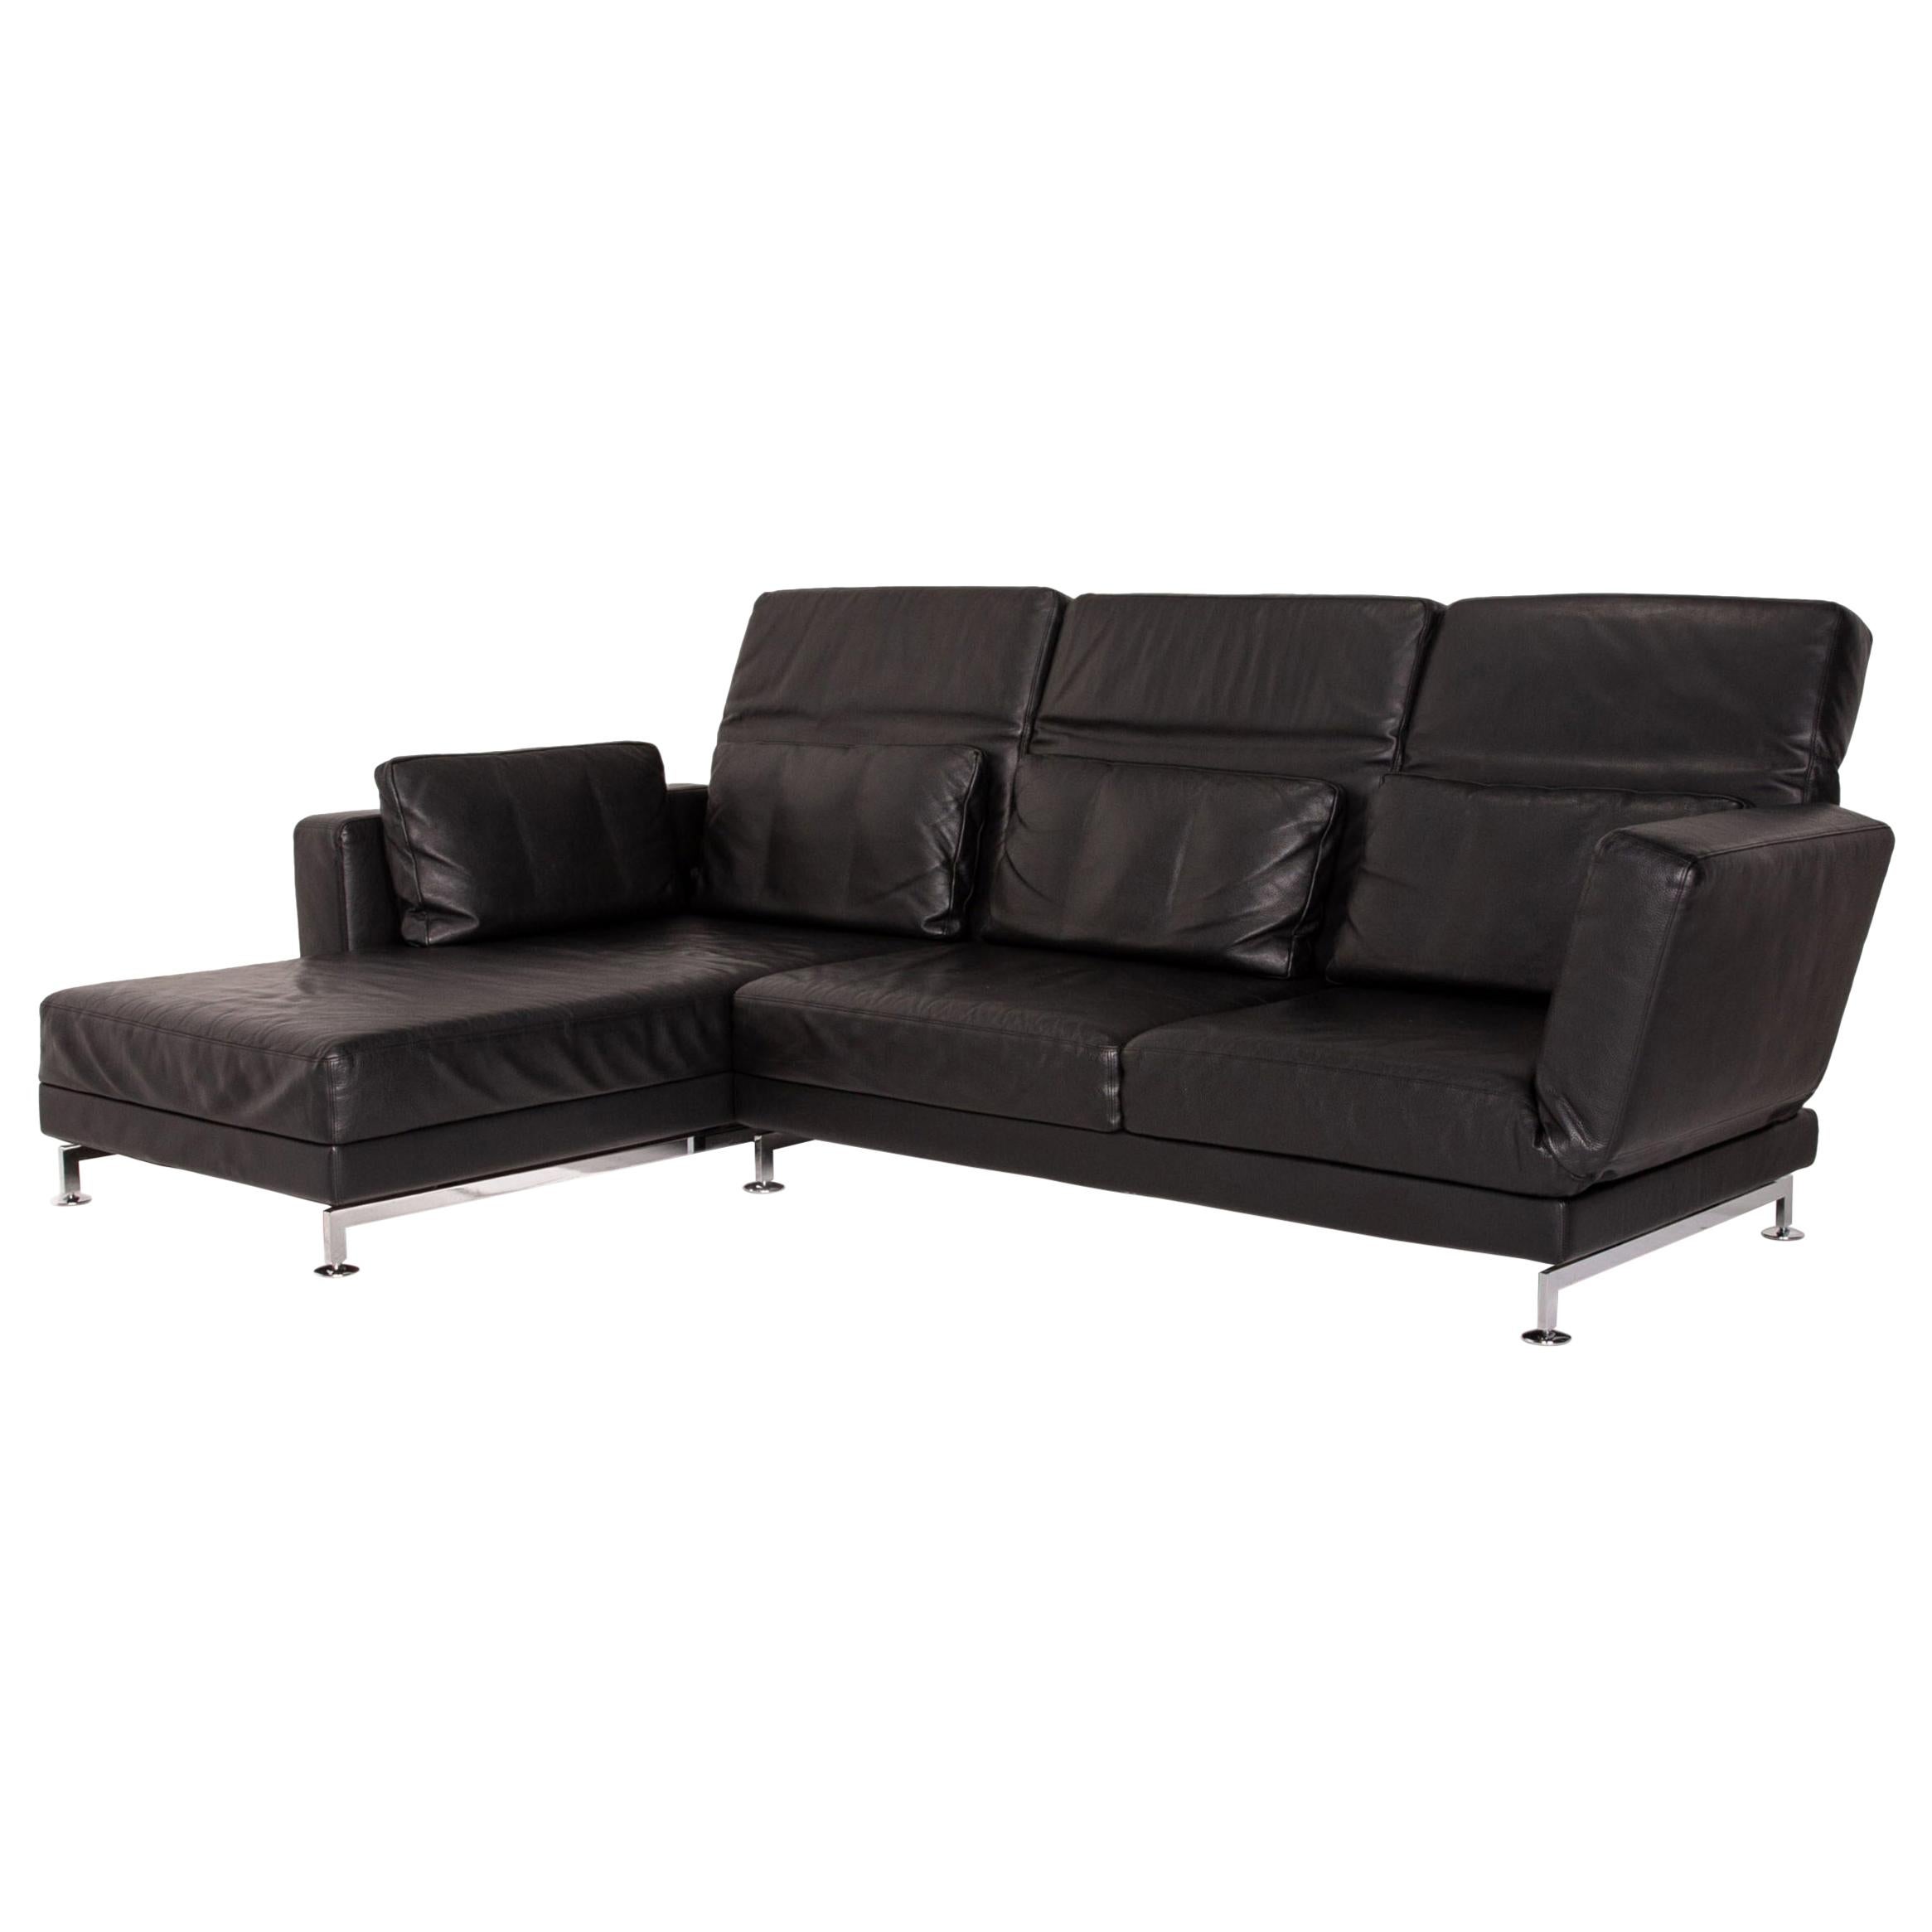 Brühl & Sippold Moule Leather Corner Sofa Black Function Relax Function Couch